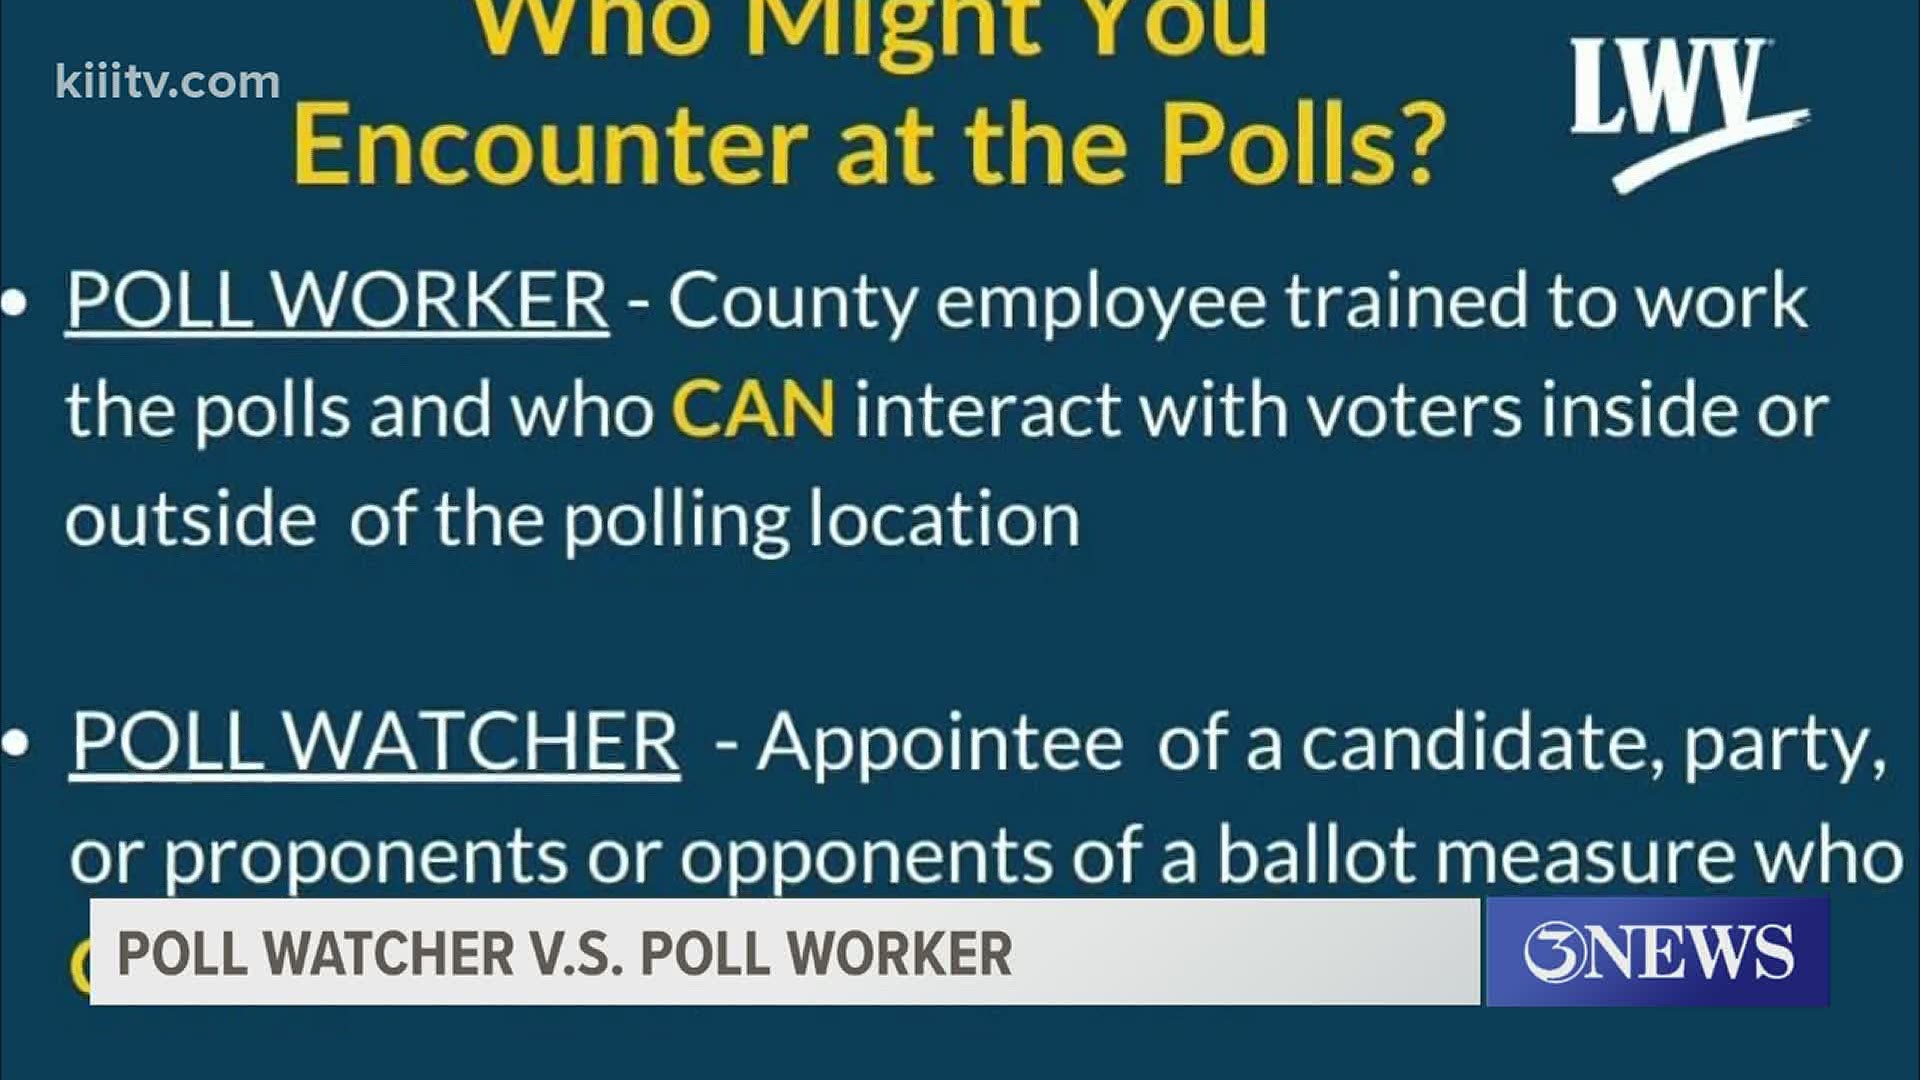 When voting you'll interact with a poll worker, but one person you may not even notice will be the poll watcher.